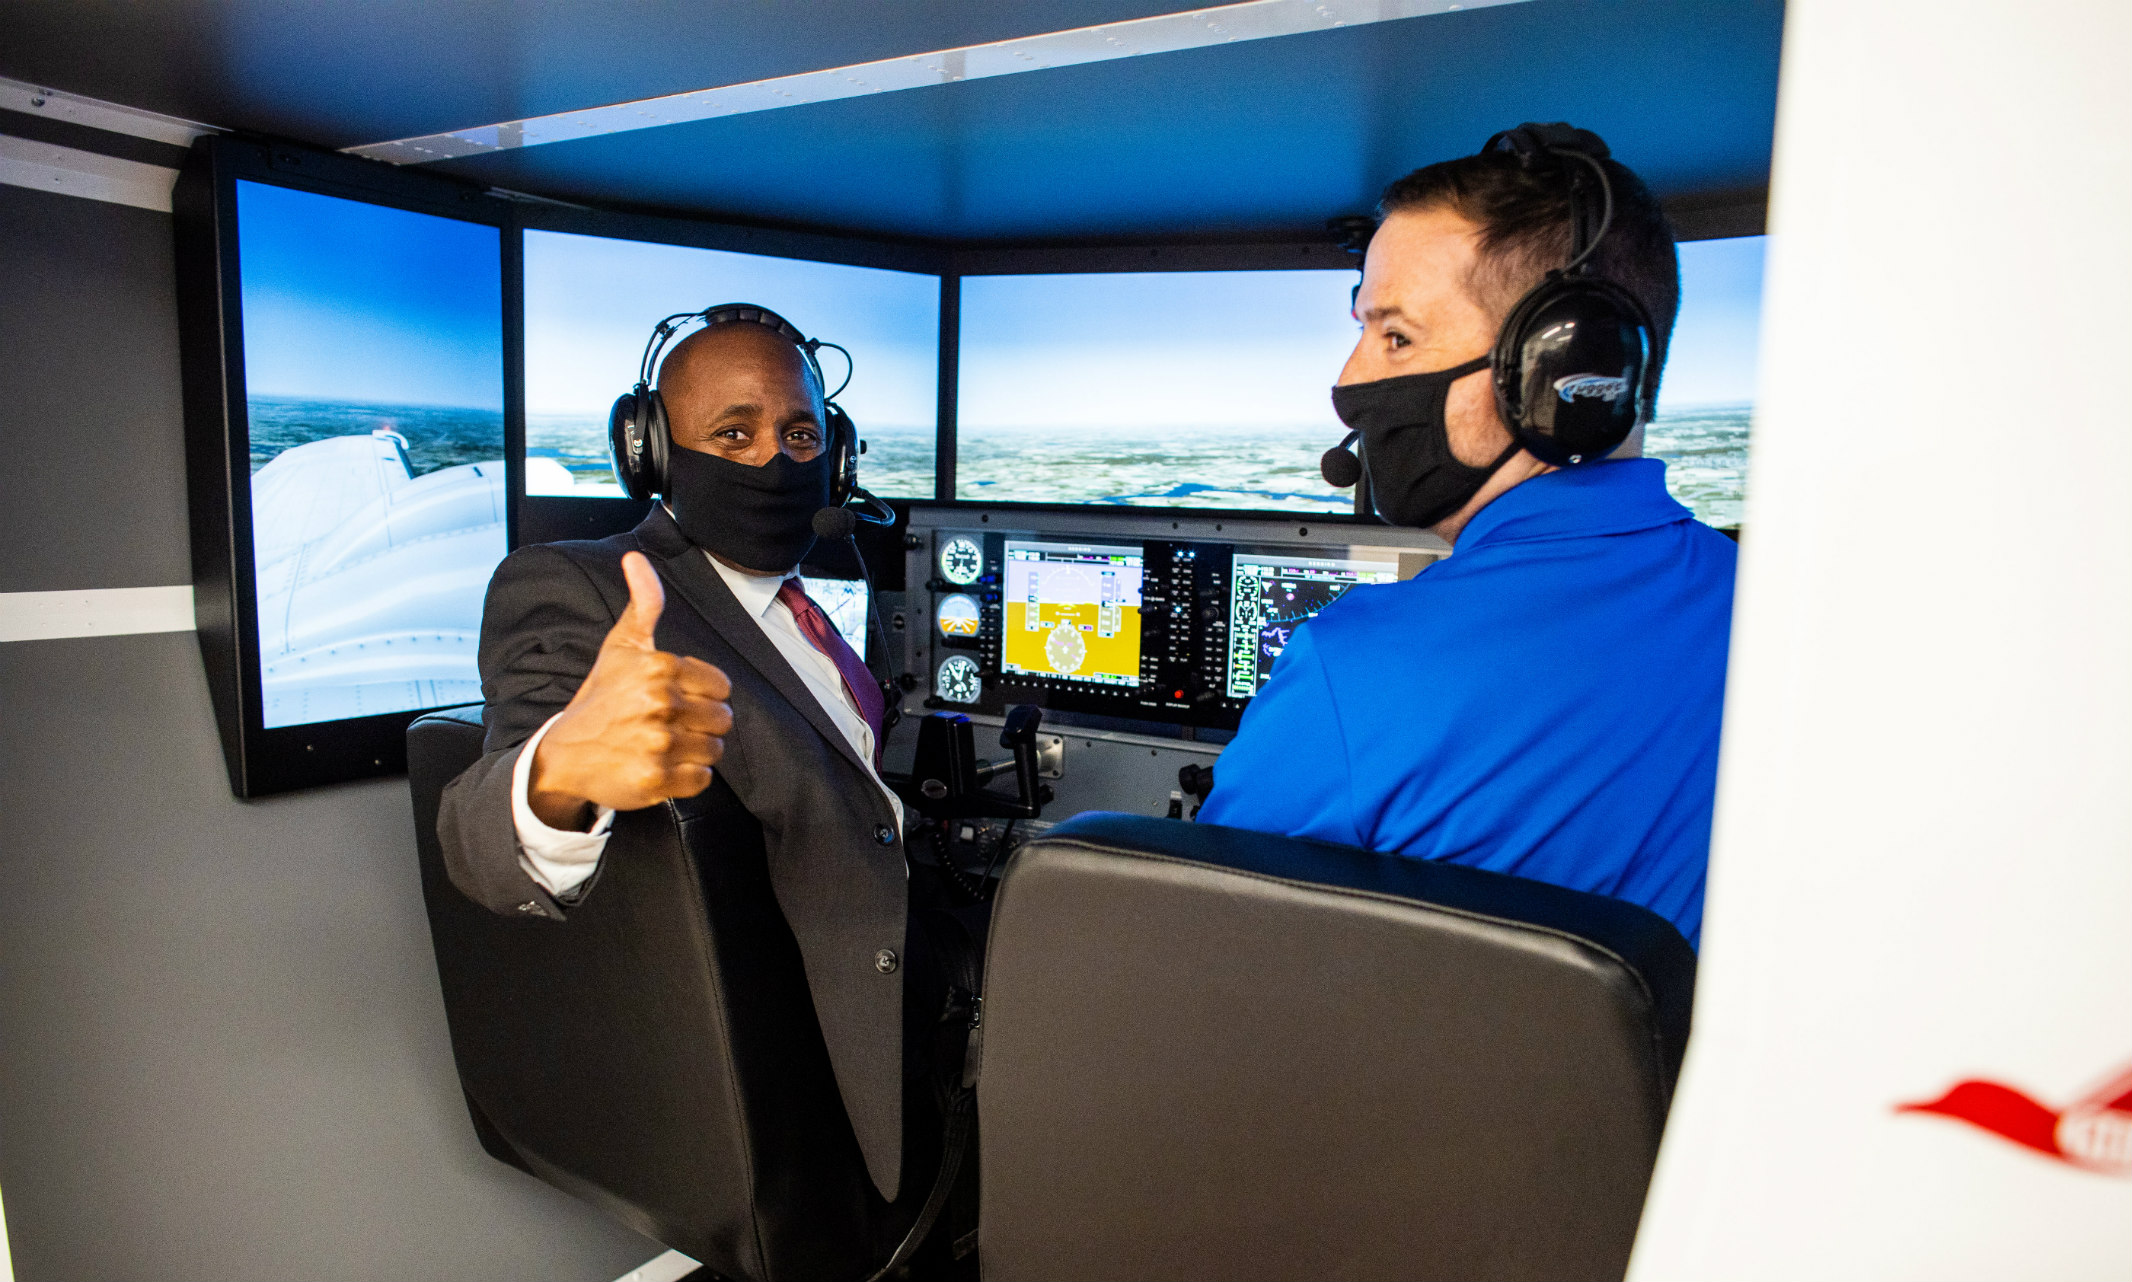 Mayor Lucas gives thumbs up while preparing to test the flight simulator at the School of Computing and Engineering